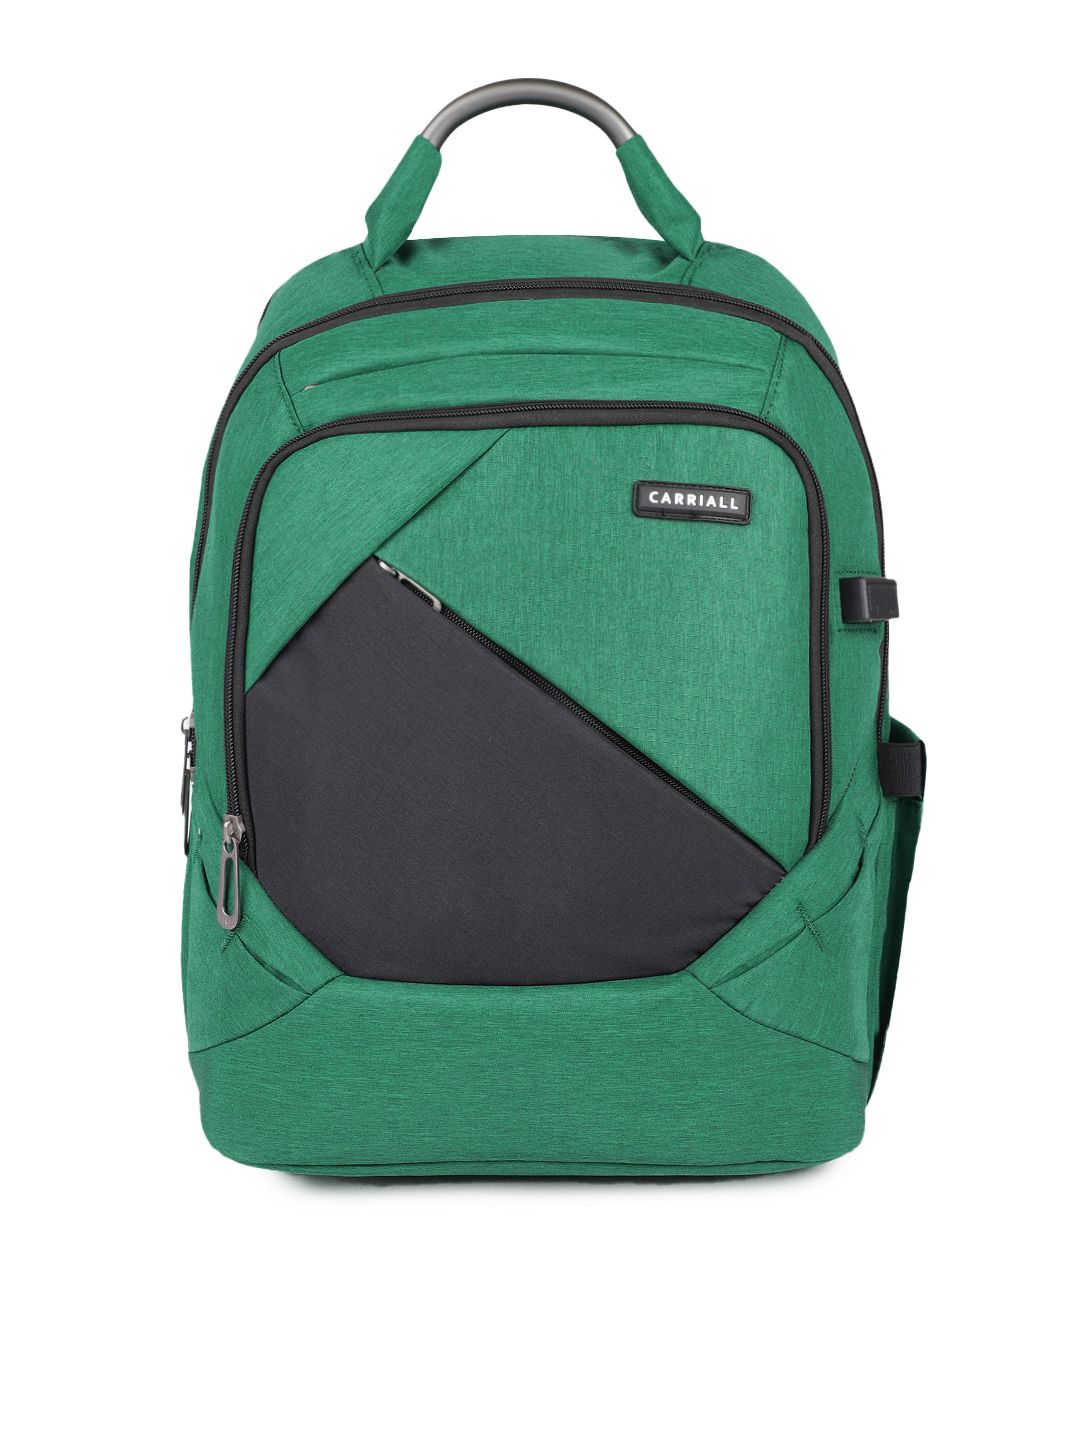 CARRIALL Unisex Green & Black Colourblocked Backpack With USB Charging Port Price in India